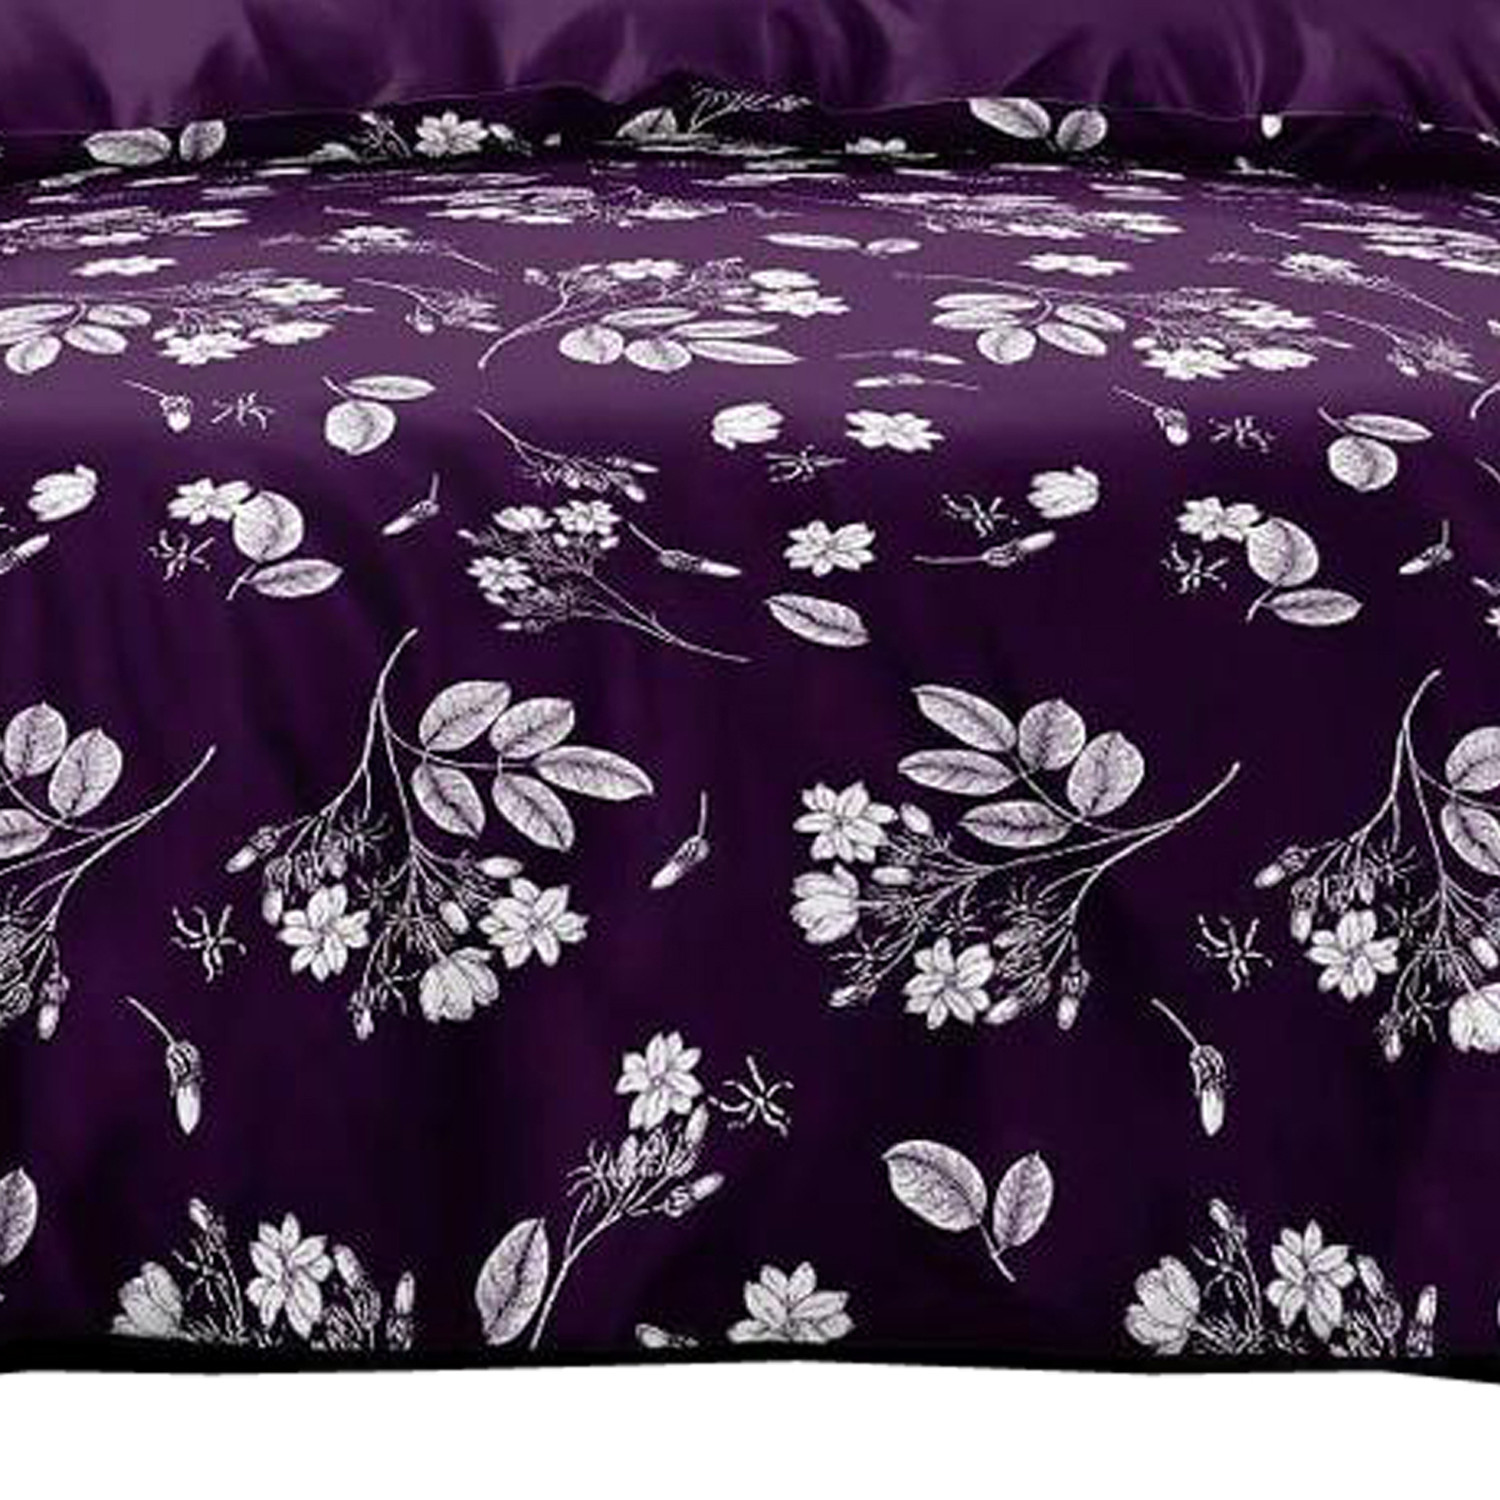 Kuber Industries Floral Print Glace Cotton Double Bedsheet with 2 Pillow Covers (Purple)